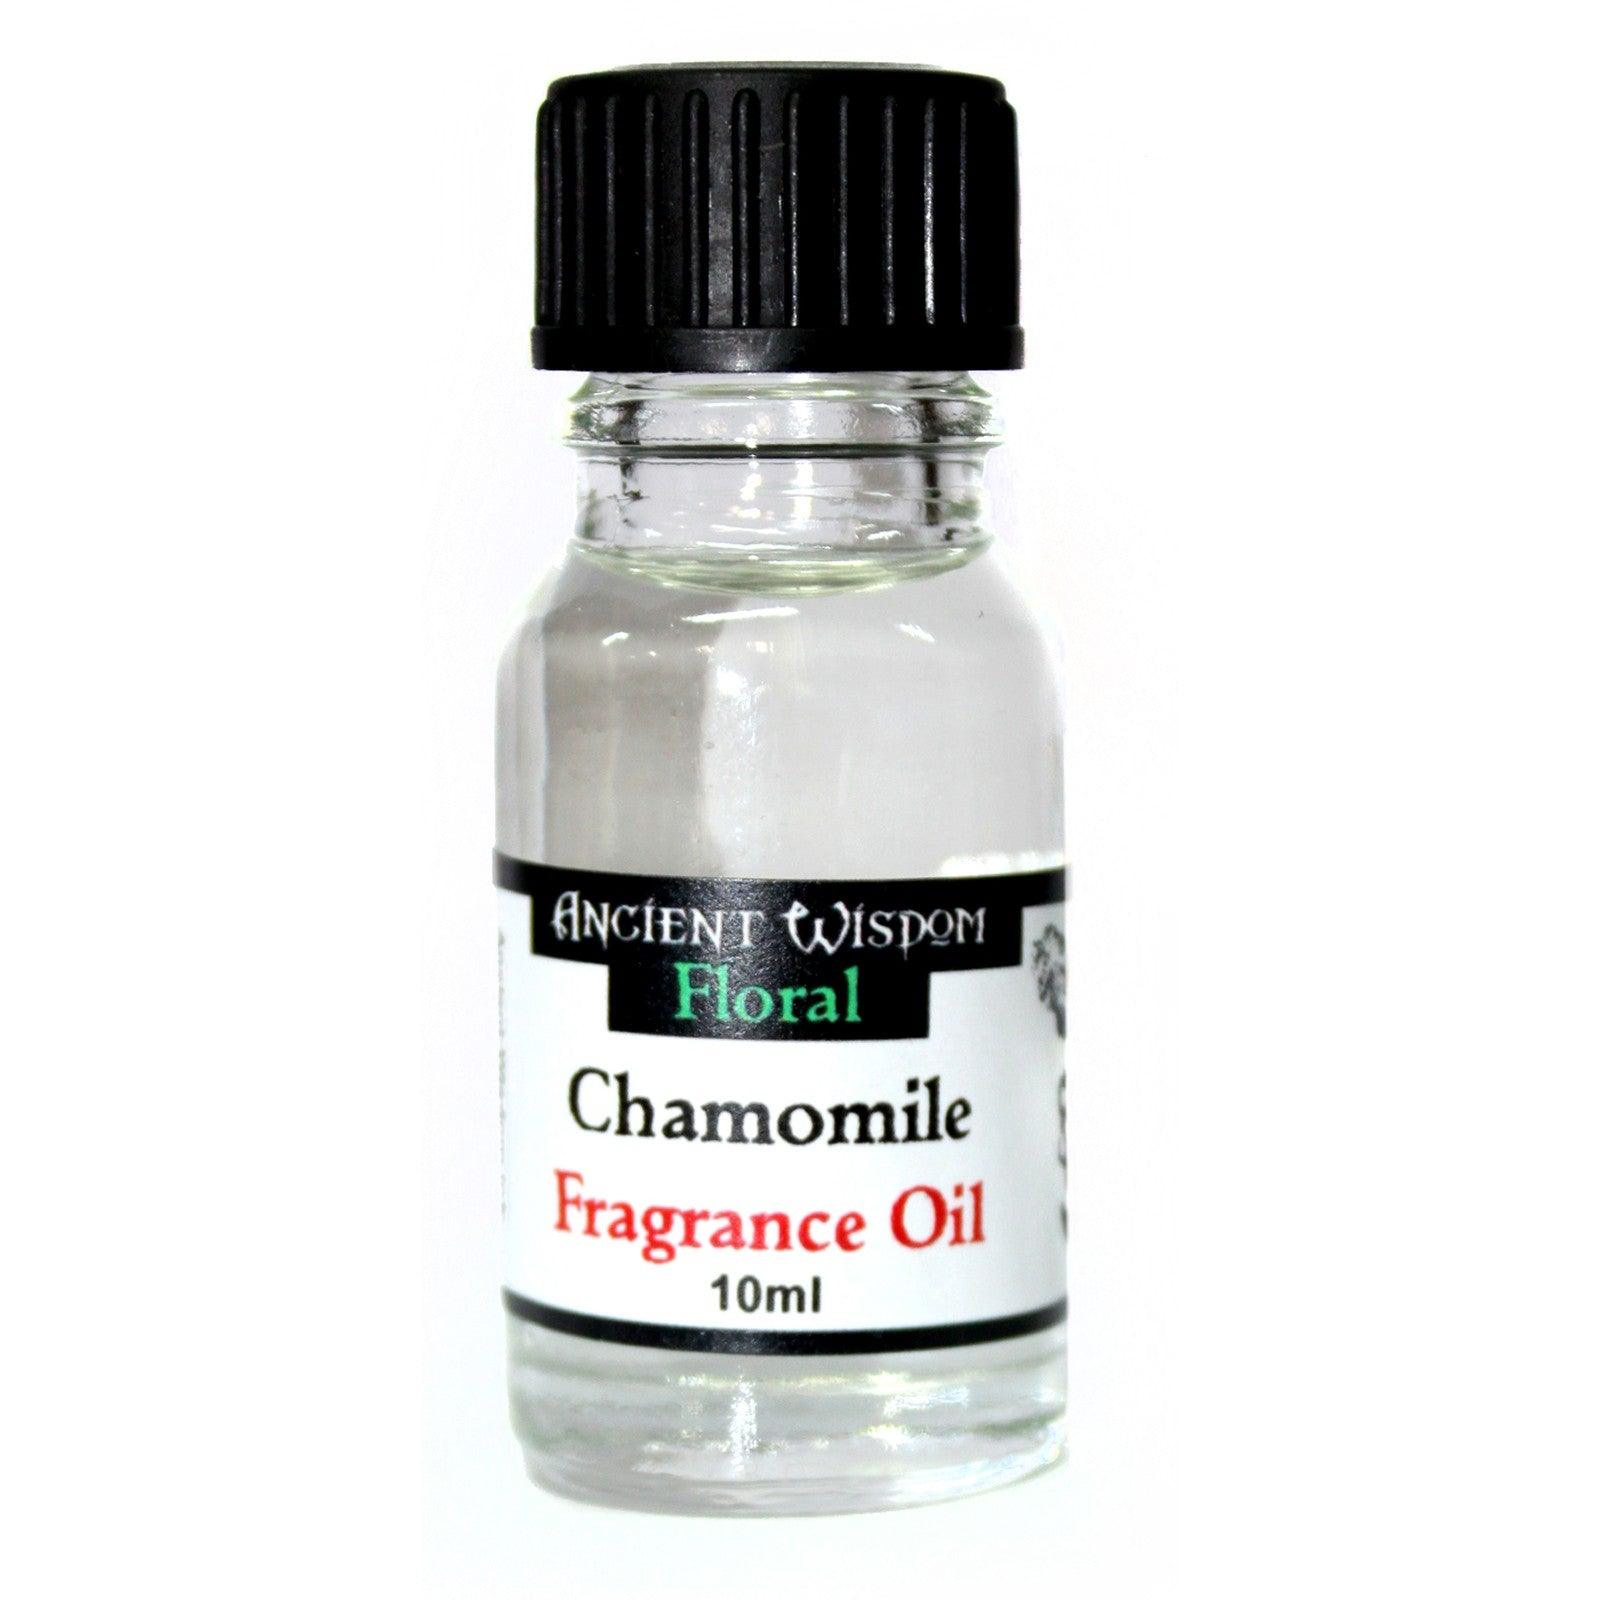 10ml Chamomile Fragrance Oil - Charming Spaces